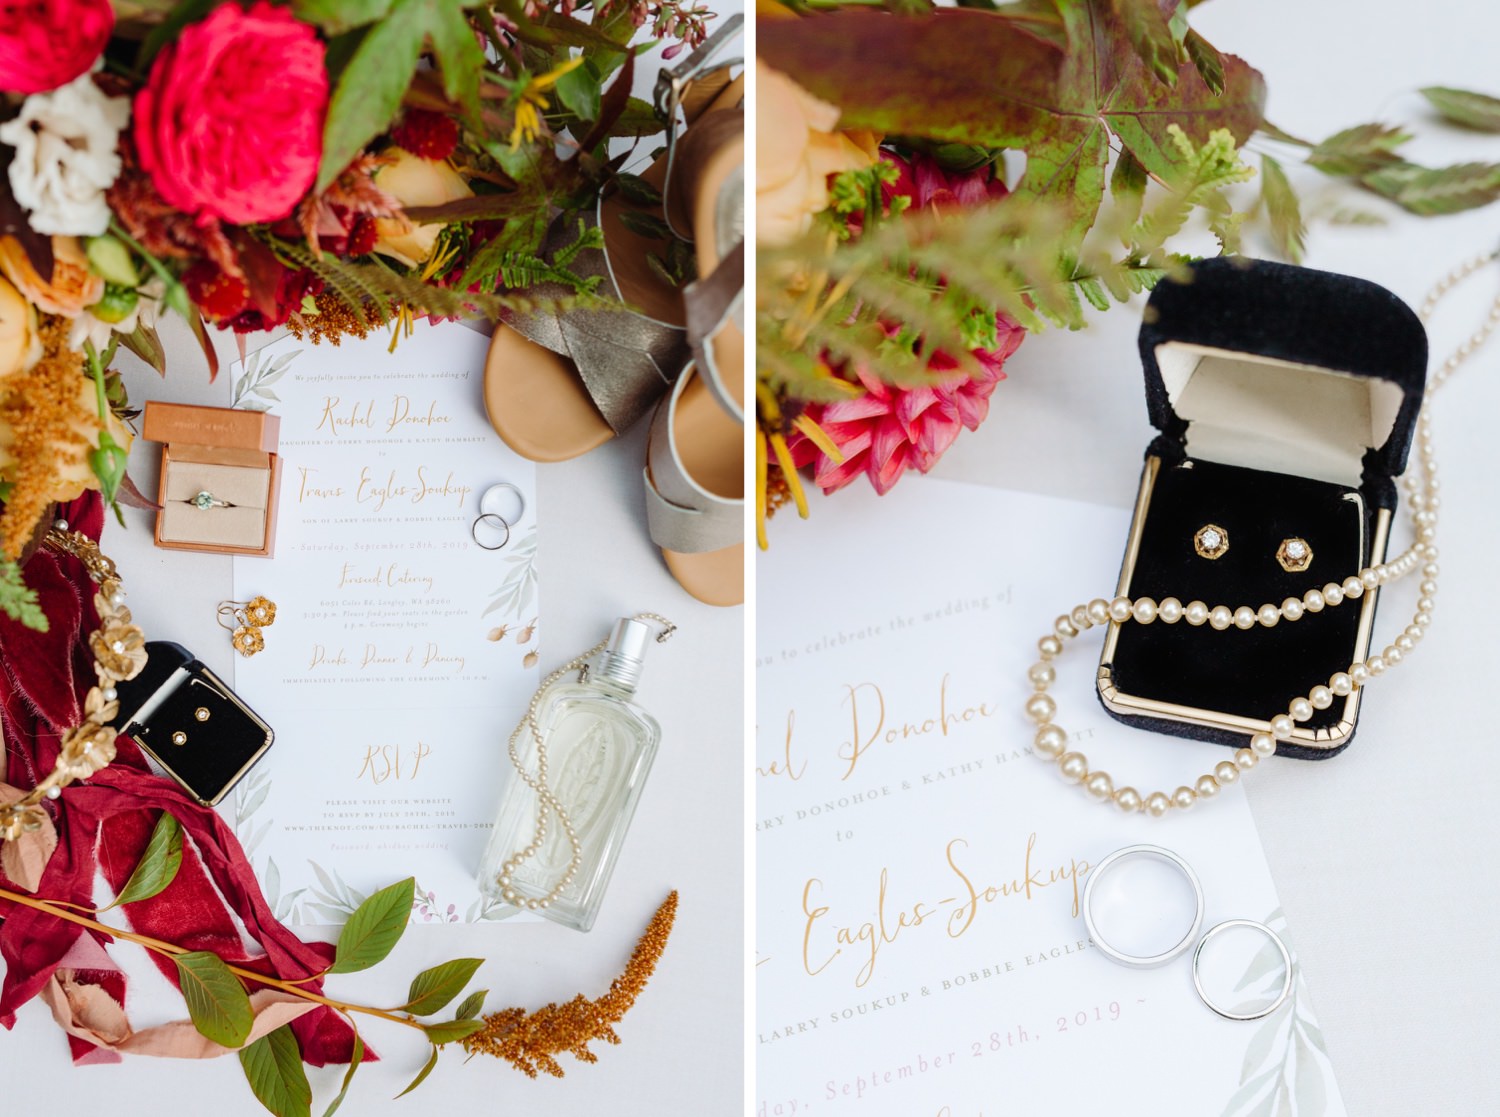 wedding invitation, flowers, and jewelry at fireseed catering wedding venue